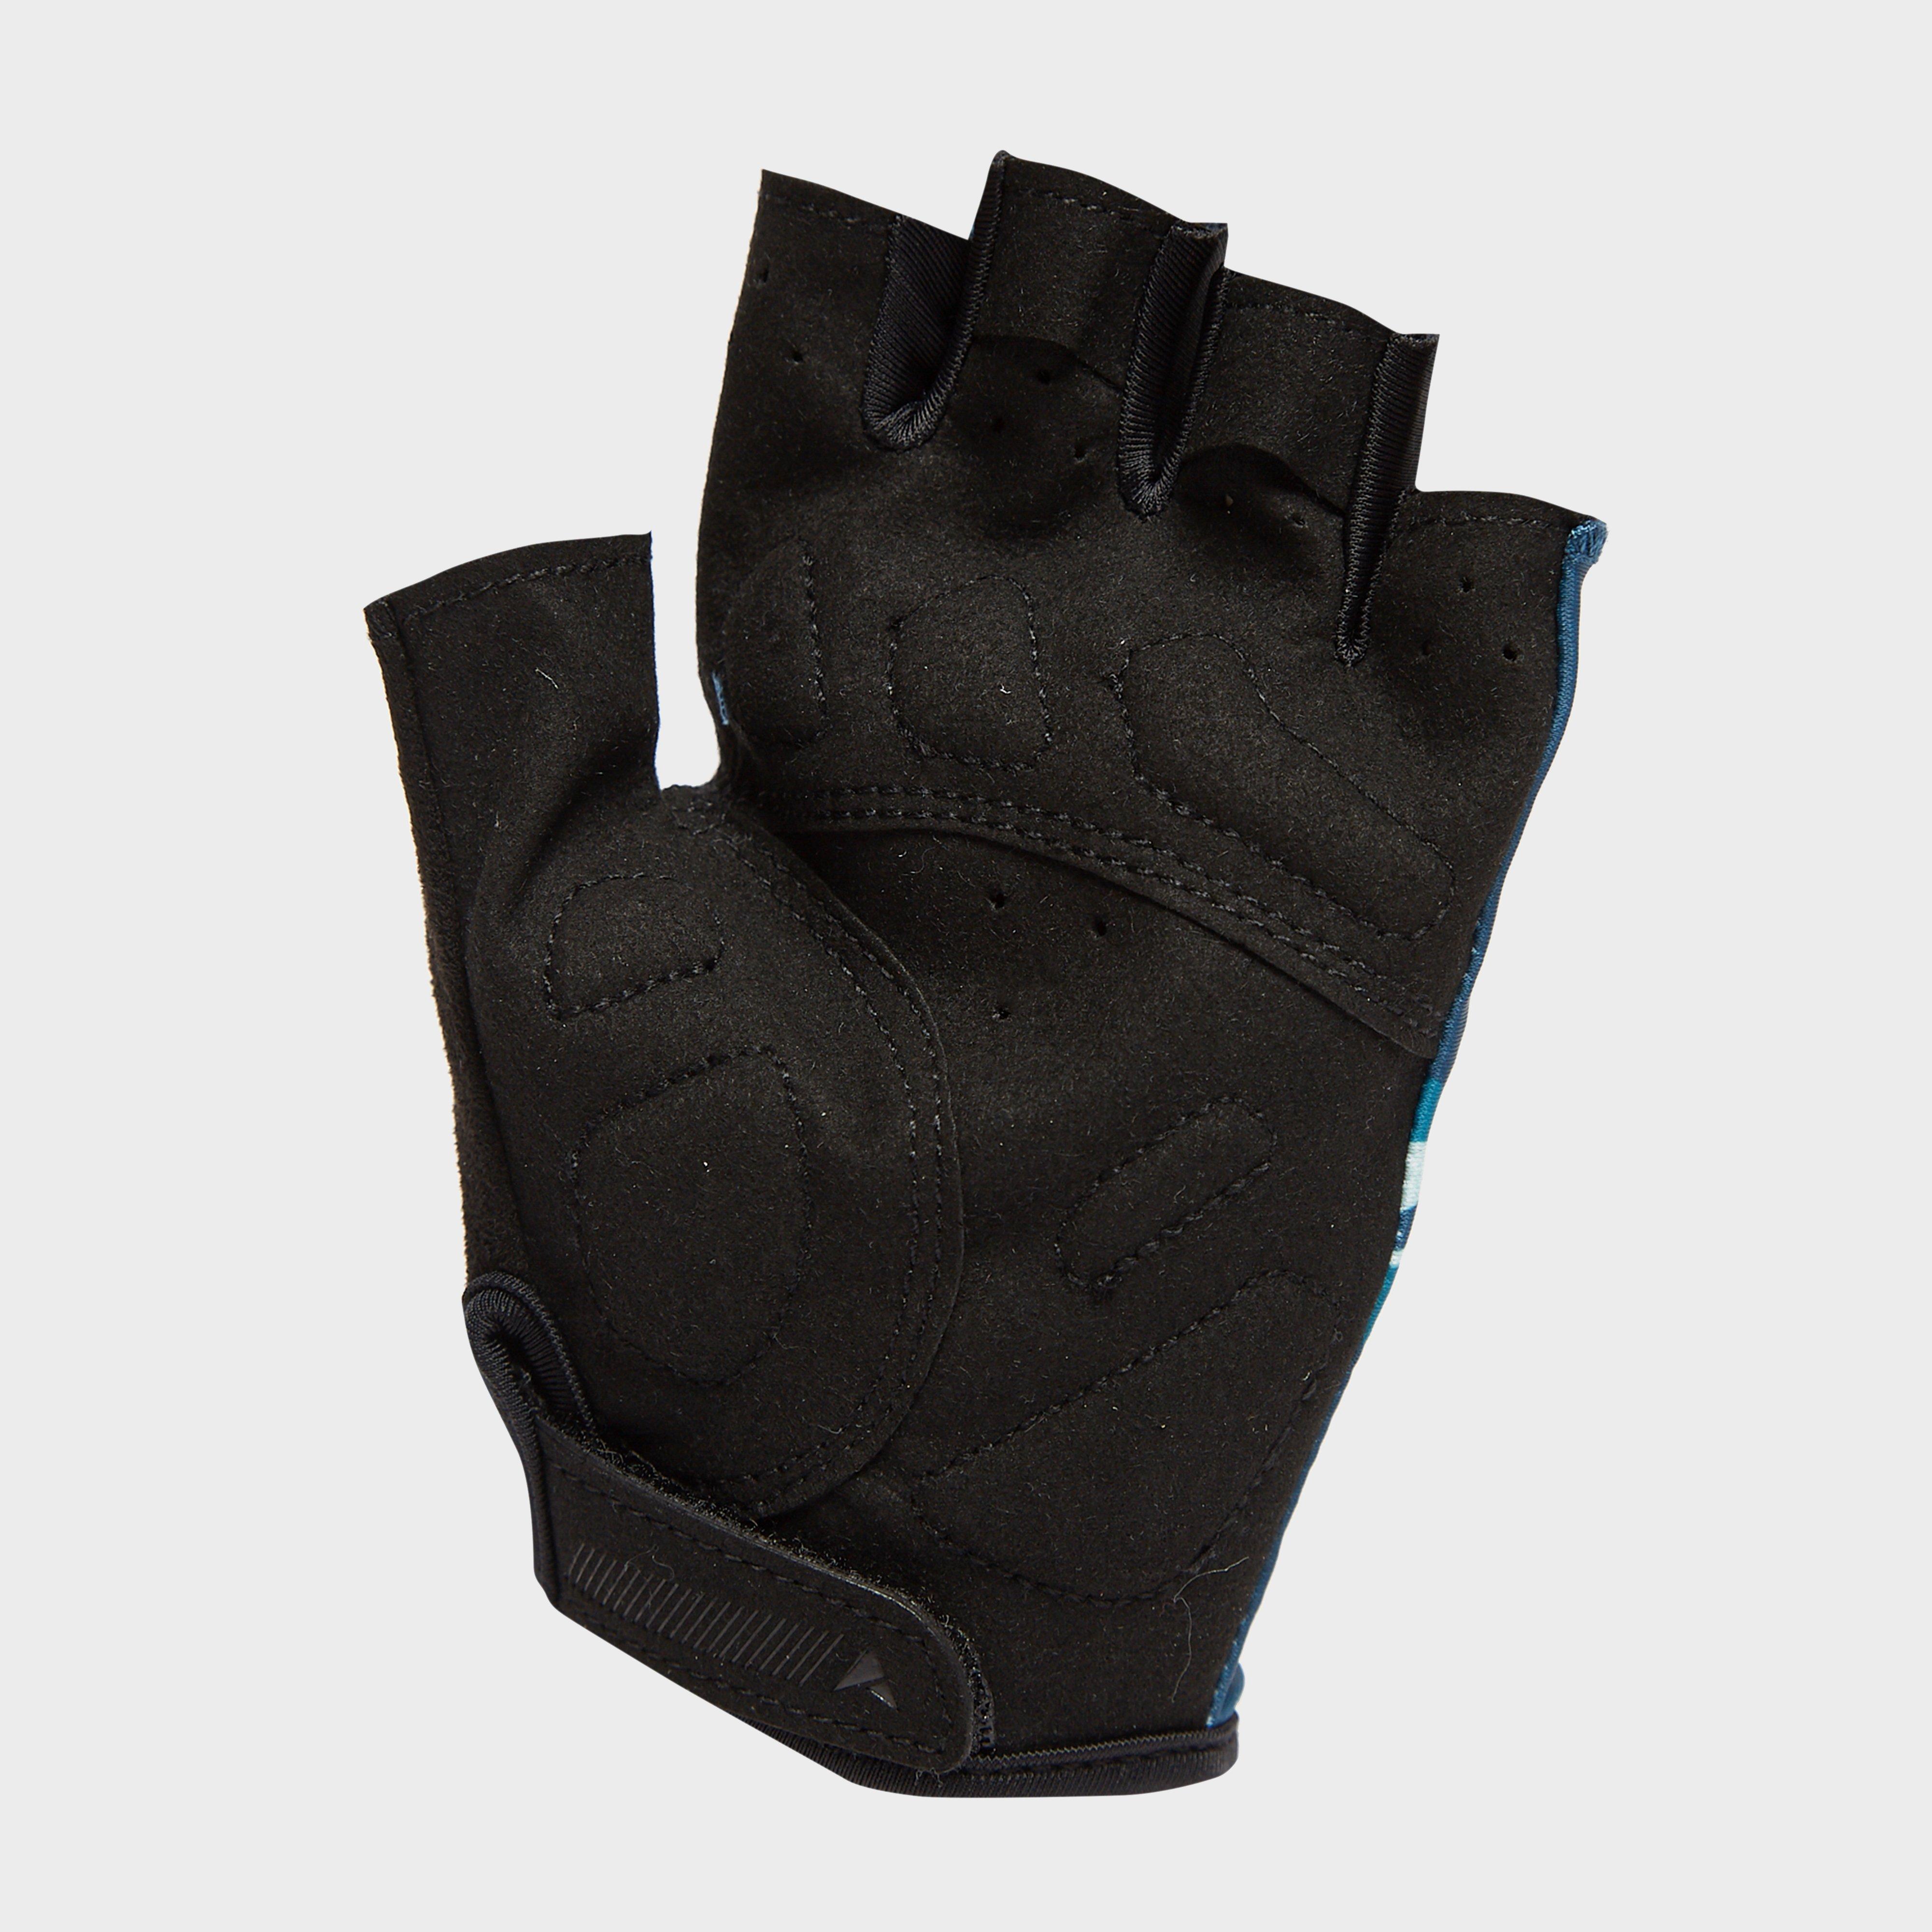 Altura Airstream Cycling Mitts Review